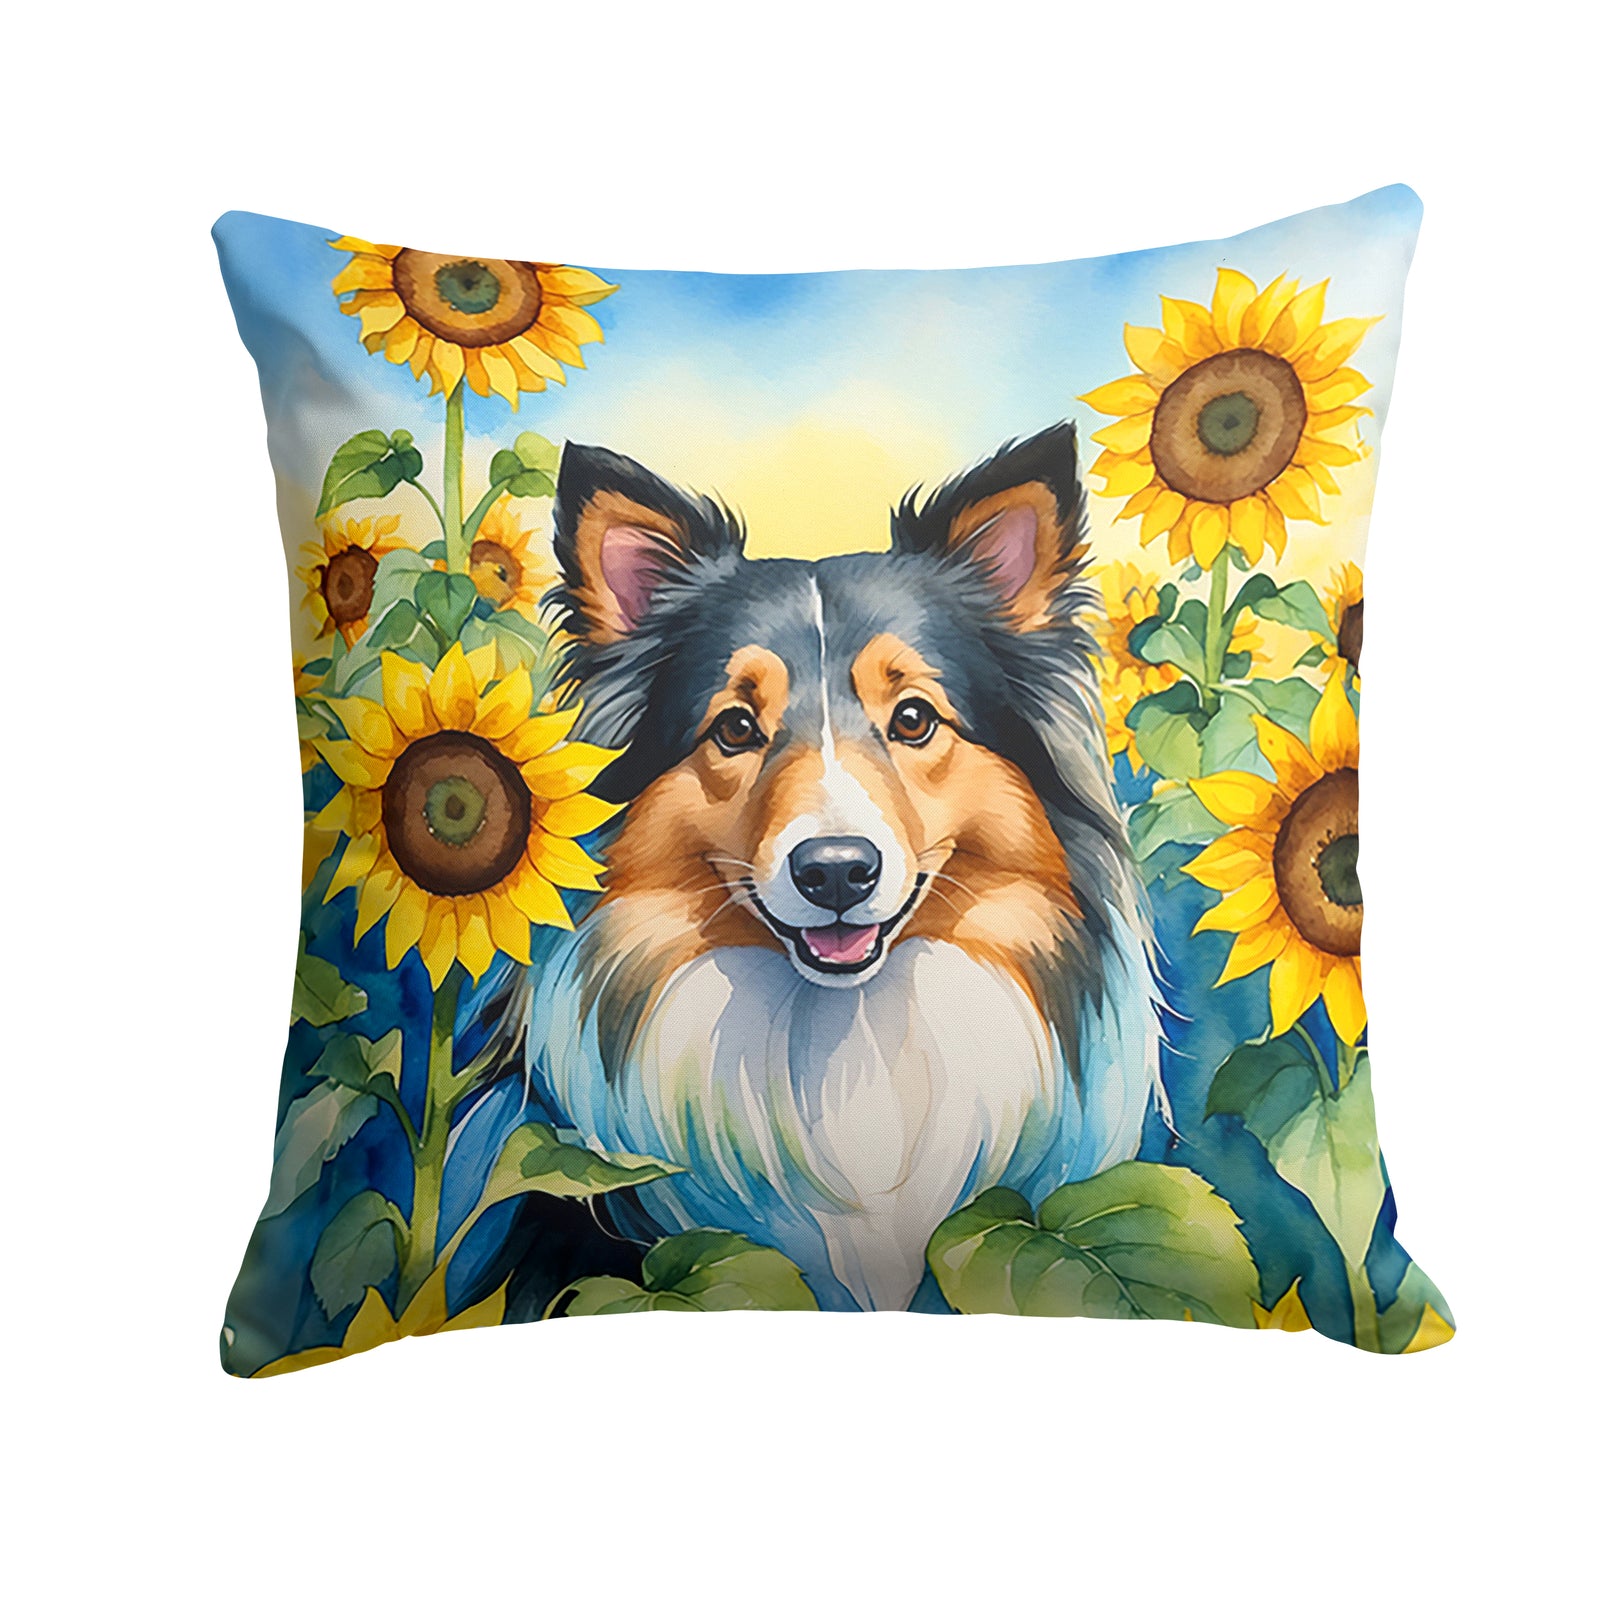 Buy this Sheltie in Sunflowers Throw Pillow